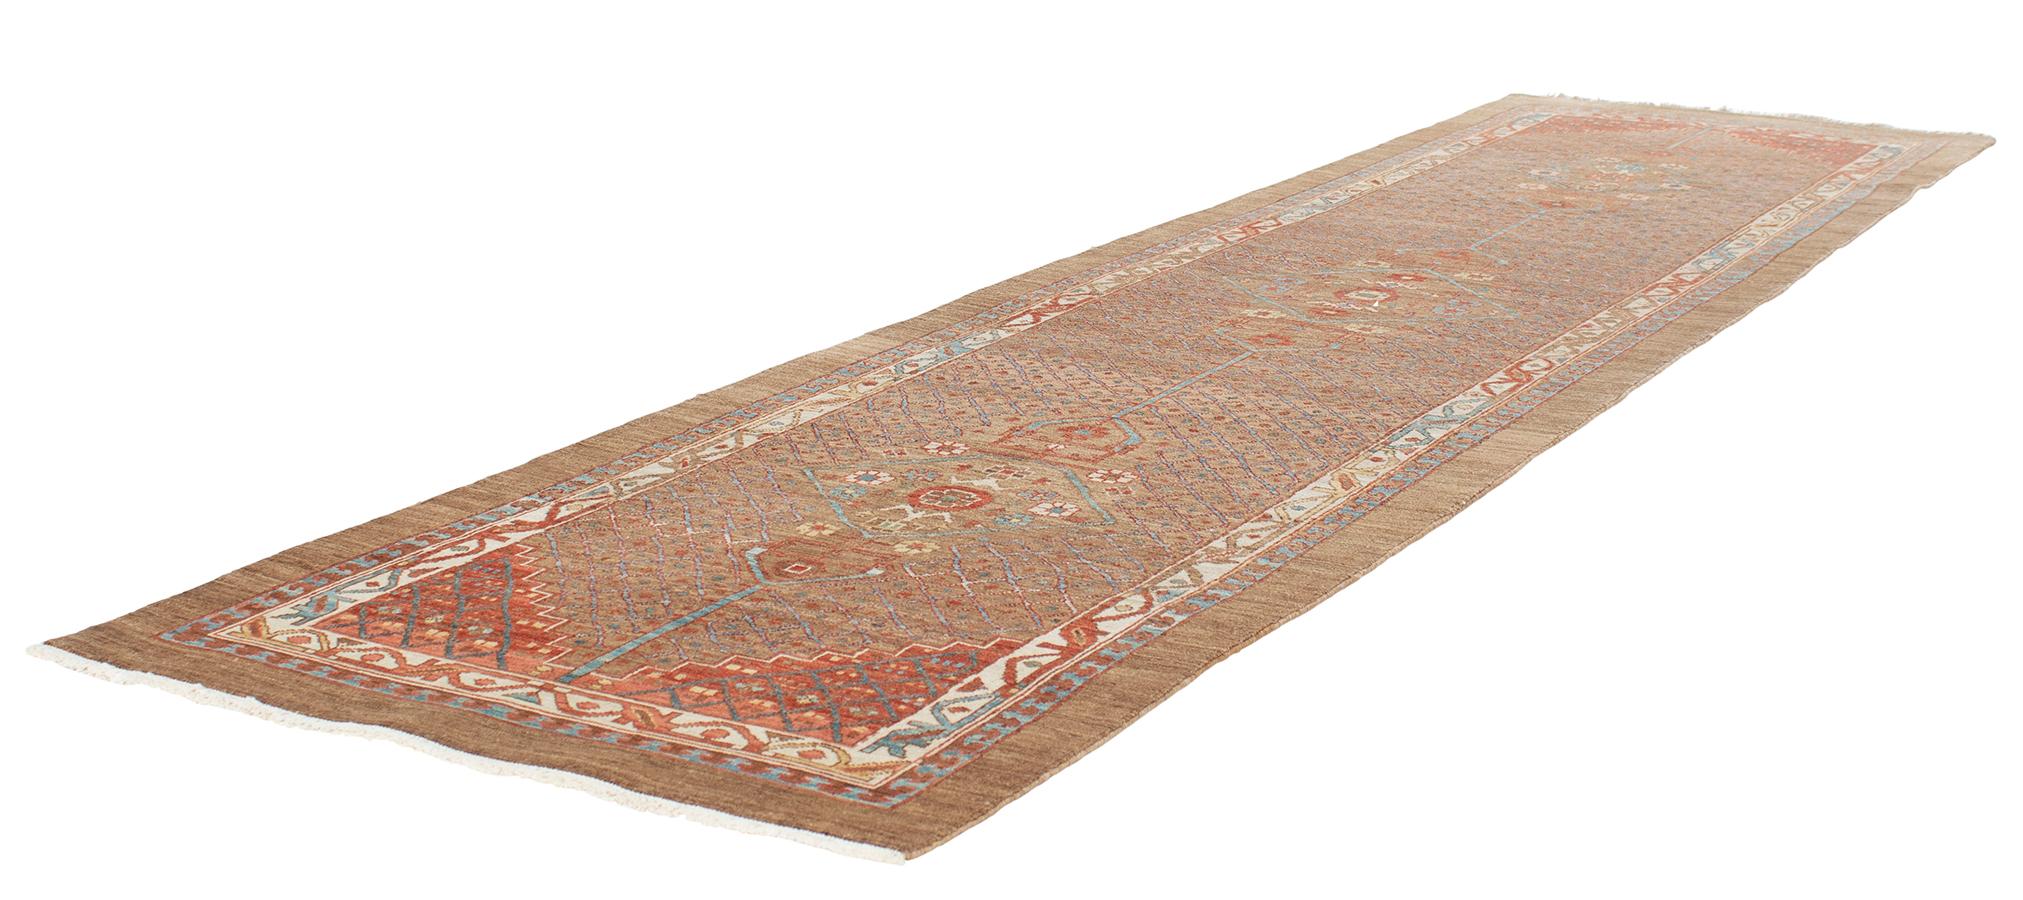 Made in Iran with the highest quality Persian hand-carded, hand-spun-wool and all vegetable dyes, this runner rug resembles the original prized antique Bakshaish rugs made in town of the same name. Located in the Heris region, it's noted as an area